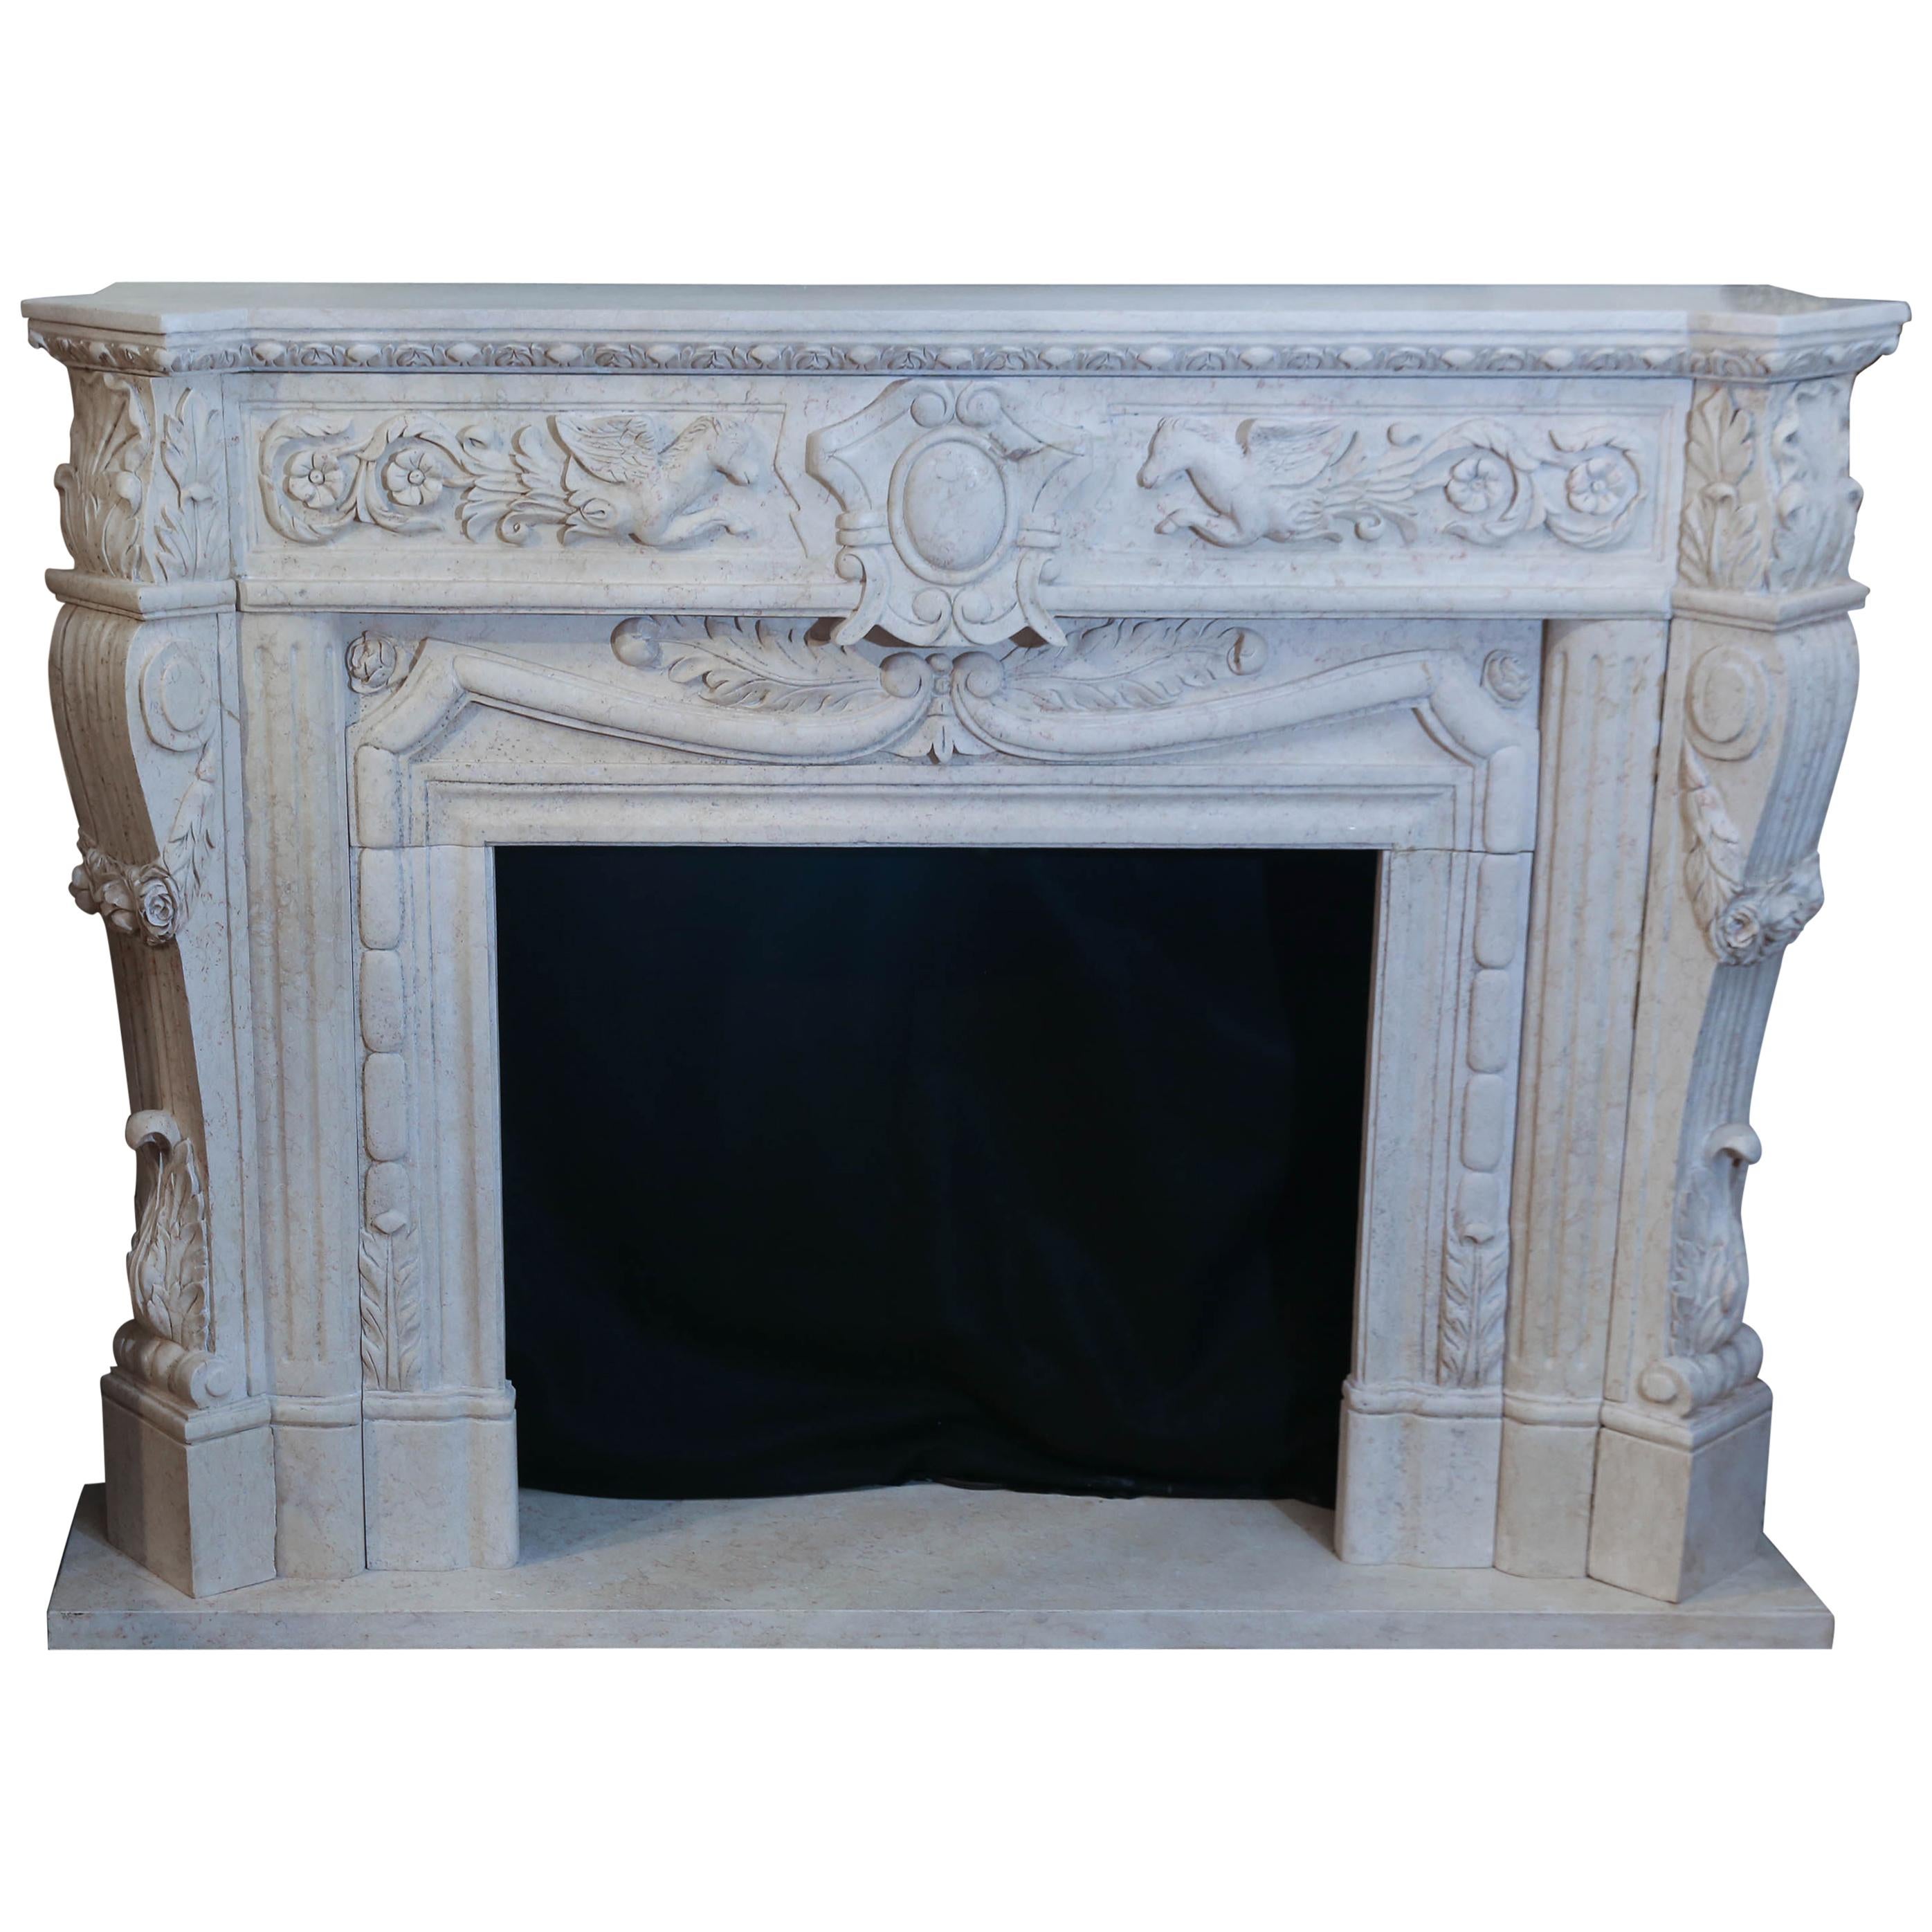 Cream Marble Mantel with Hand Carving